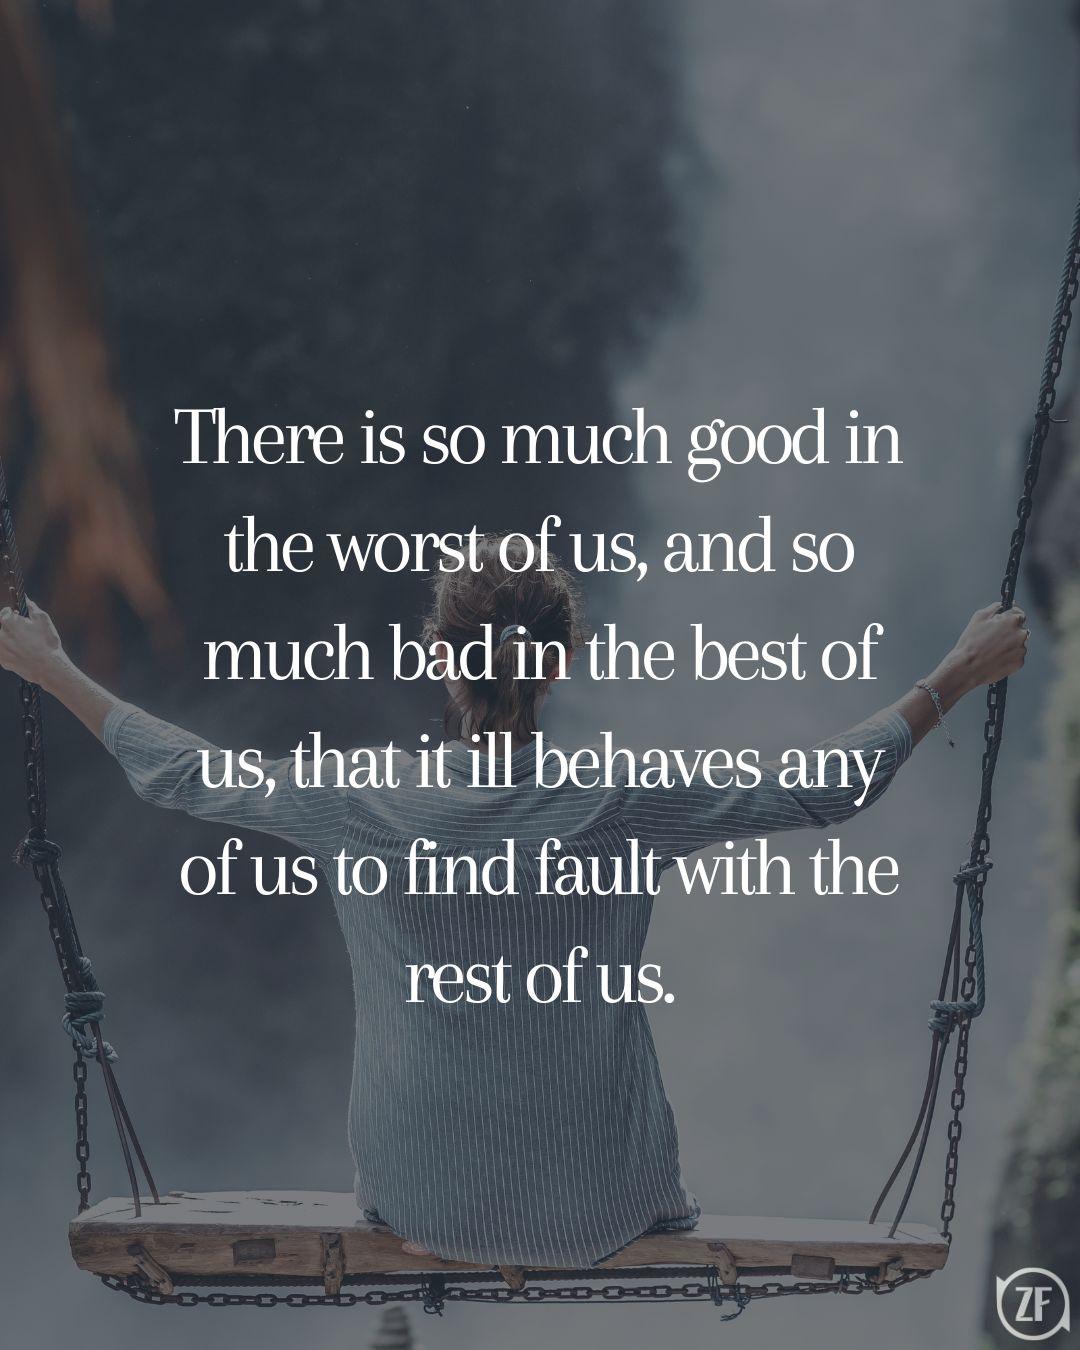 There is so much good in the worst of us, and so much bad in the best of us, that it ill behaves any of us to find fault with the rest of us.